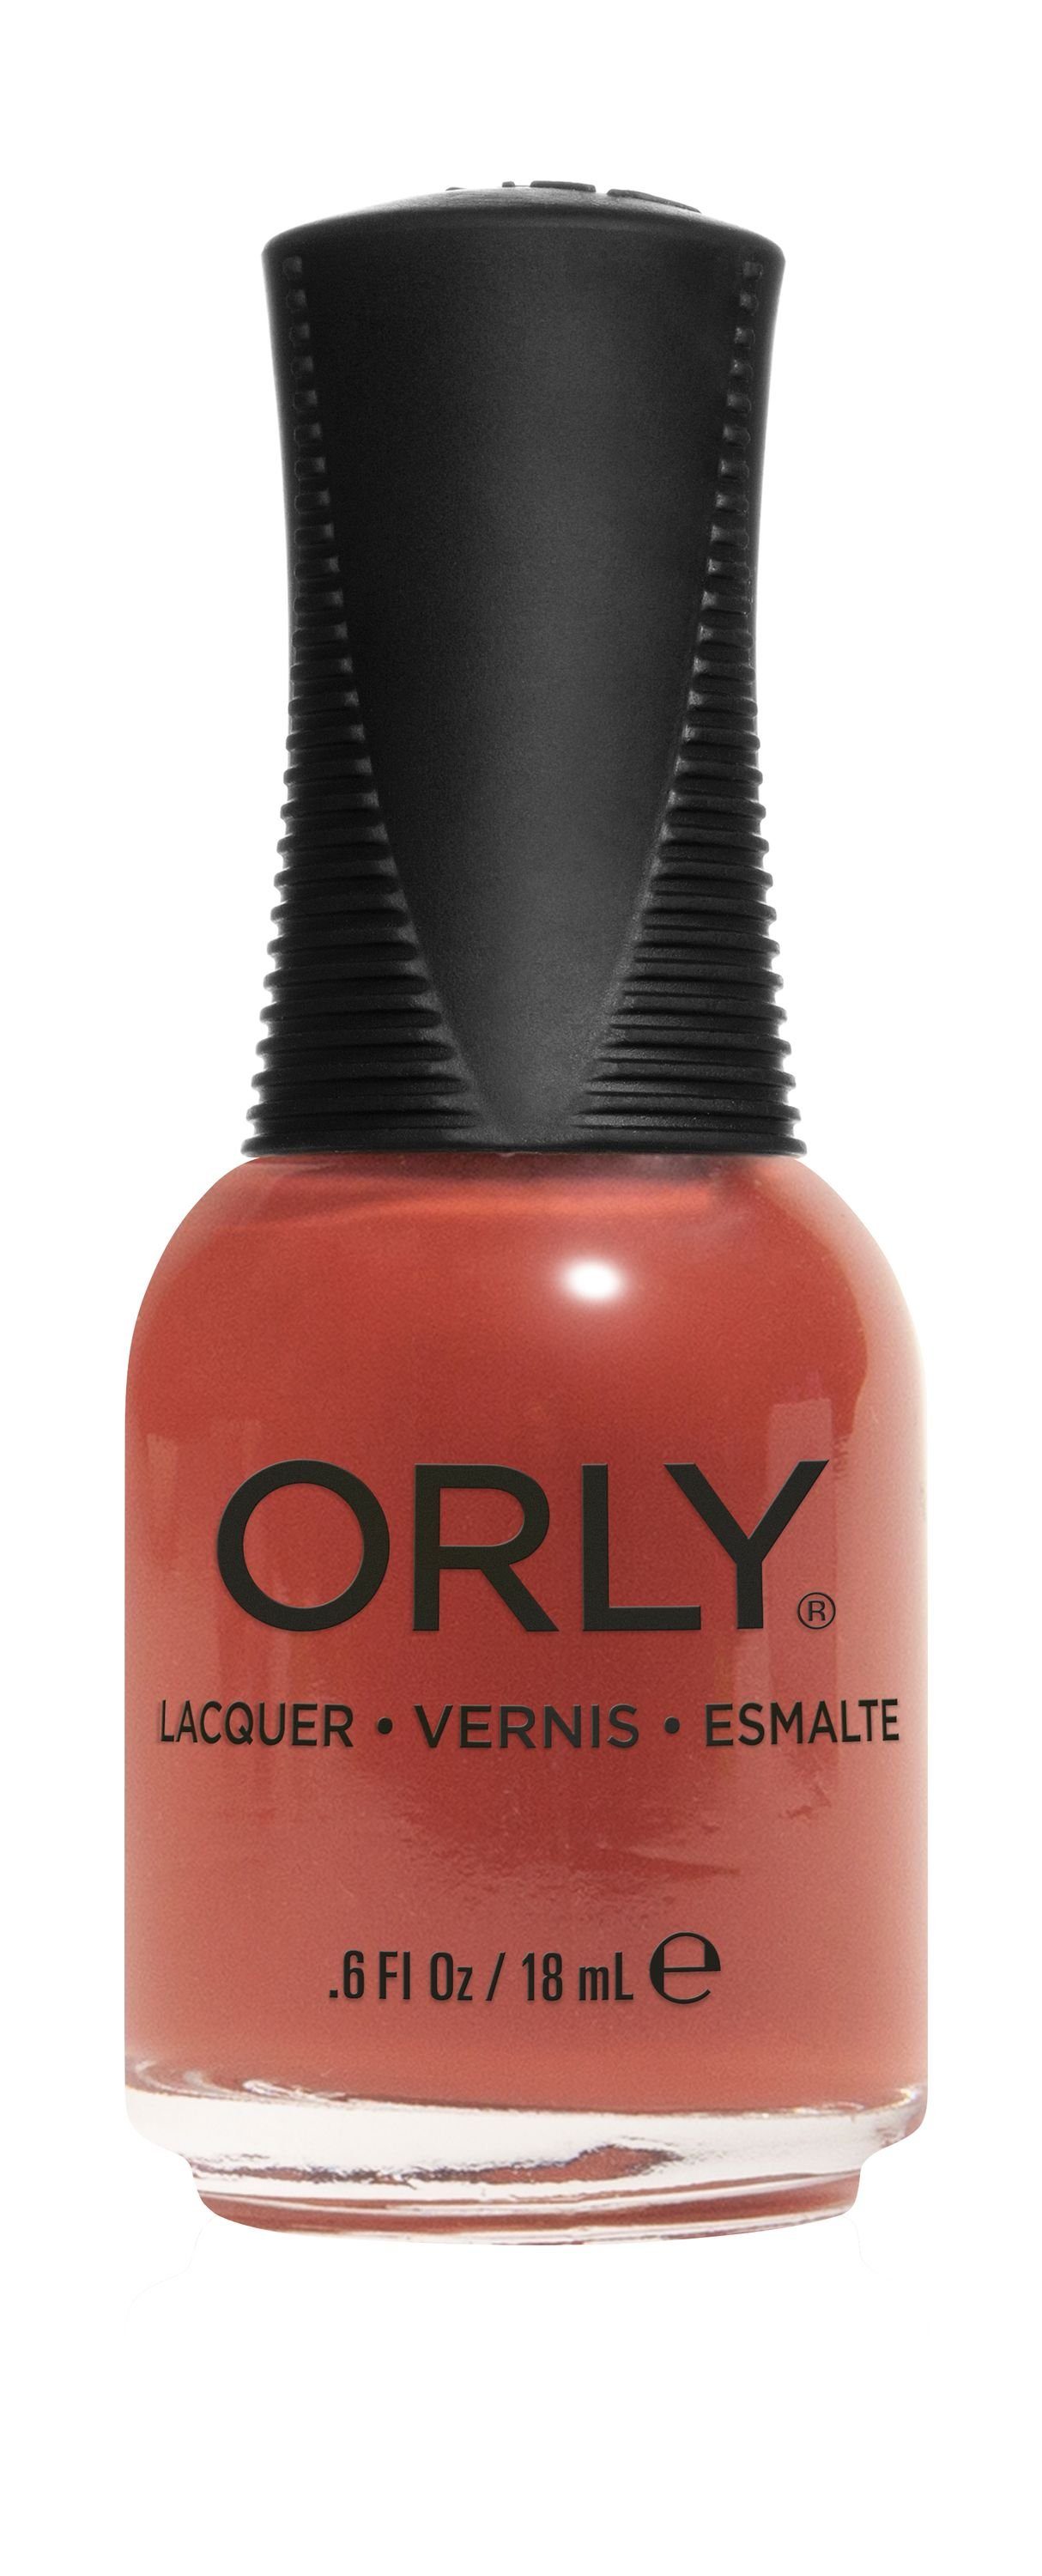 In - Groove, 18ML Nagellack ORLY The ORLY Nagellack